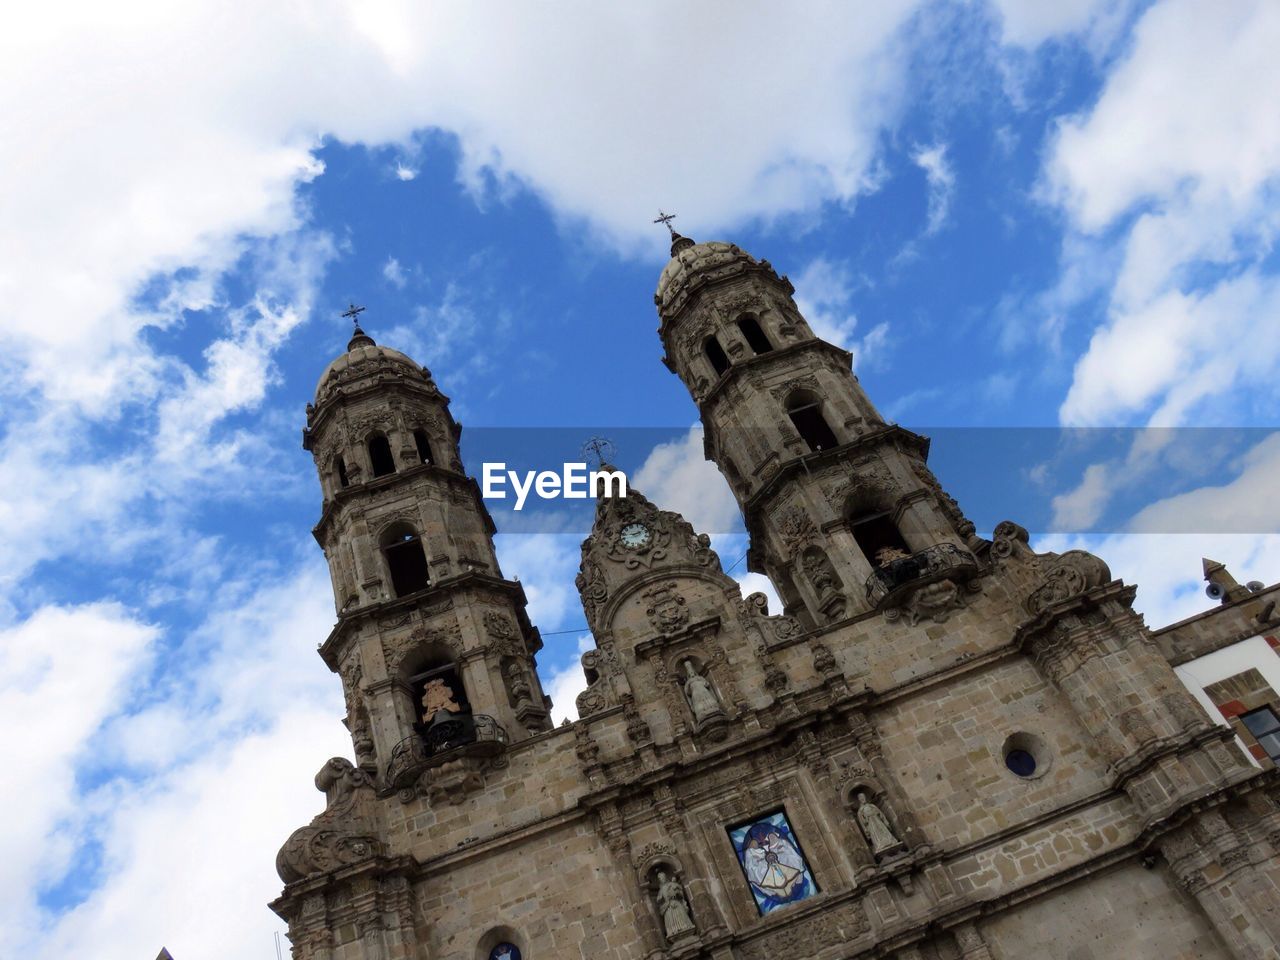 Basilica of our lady of zapopan